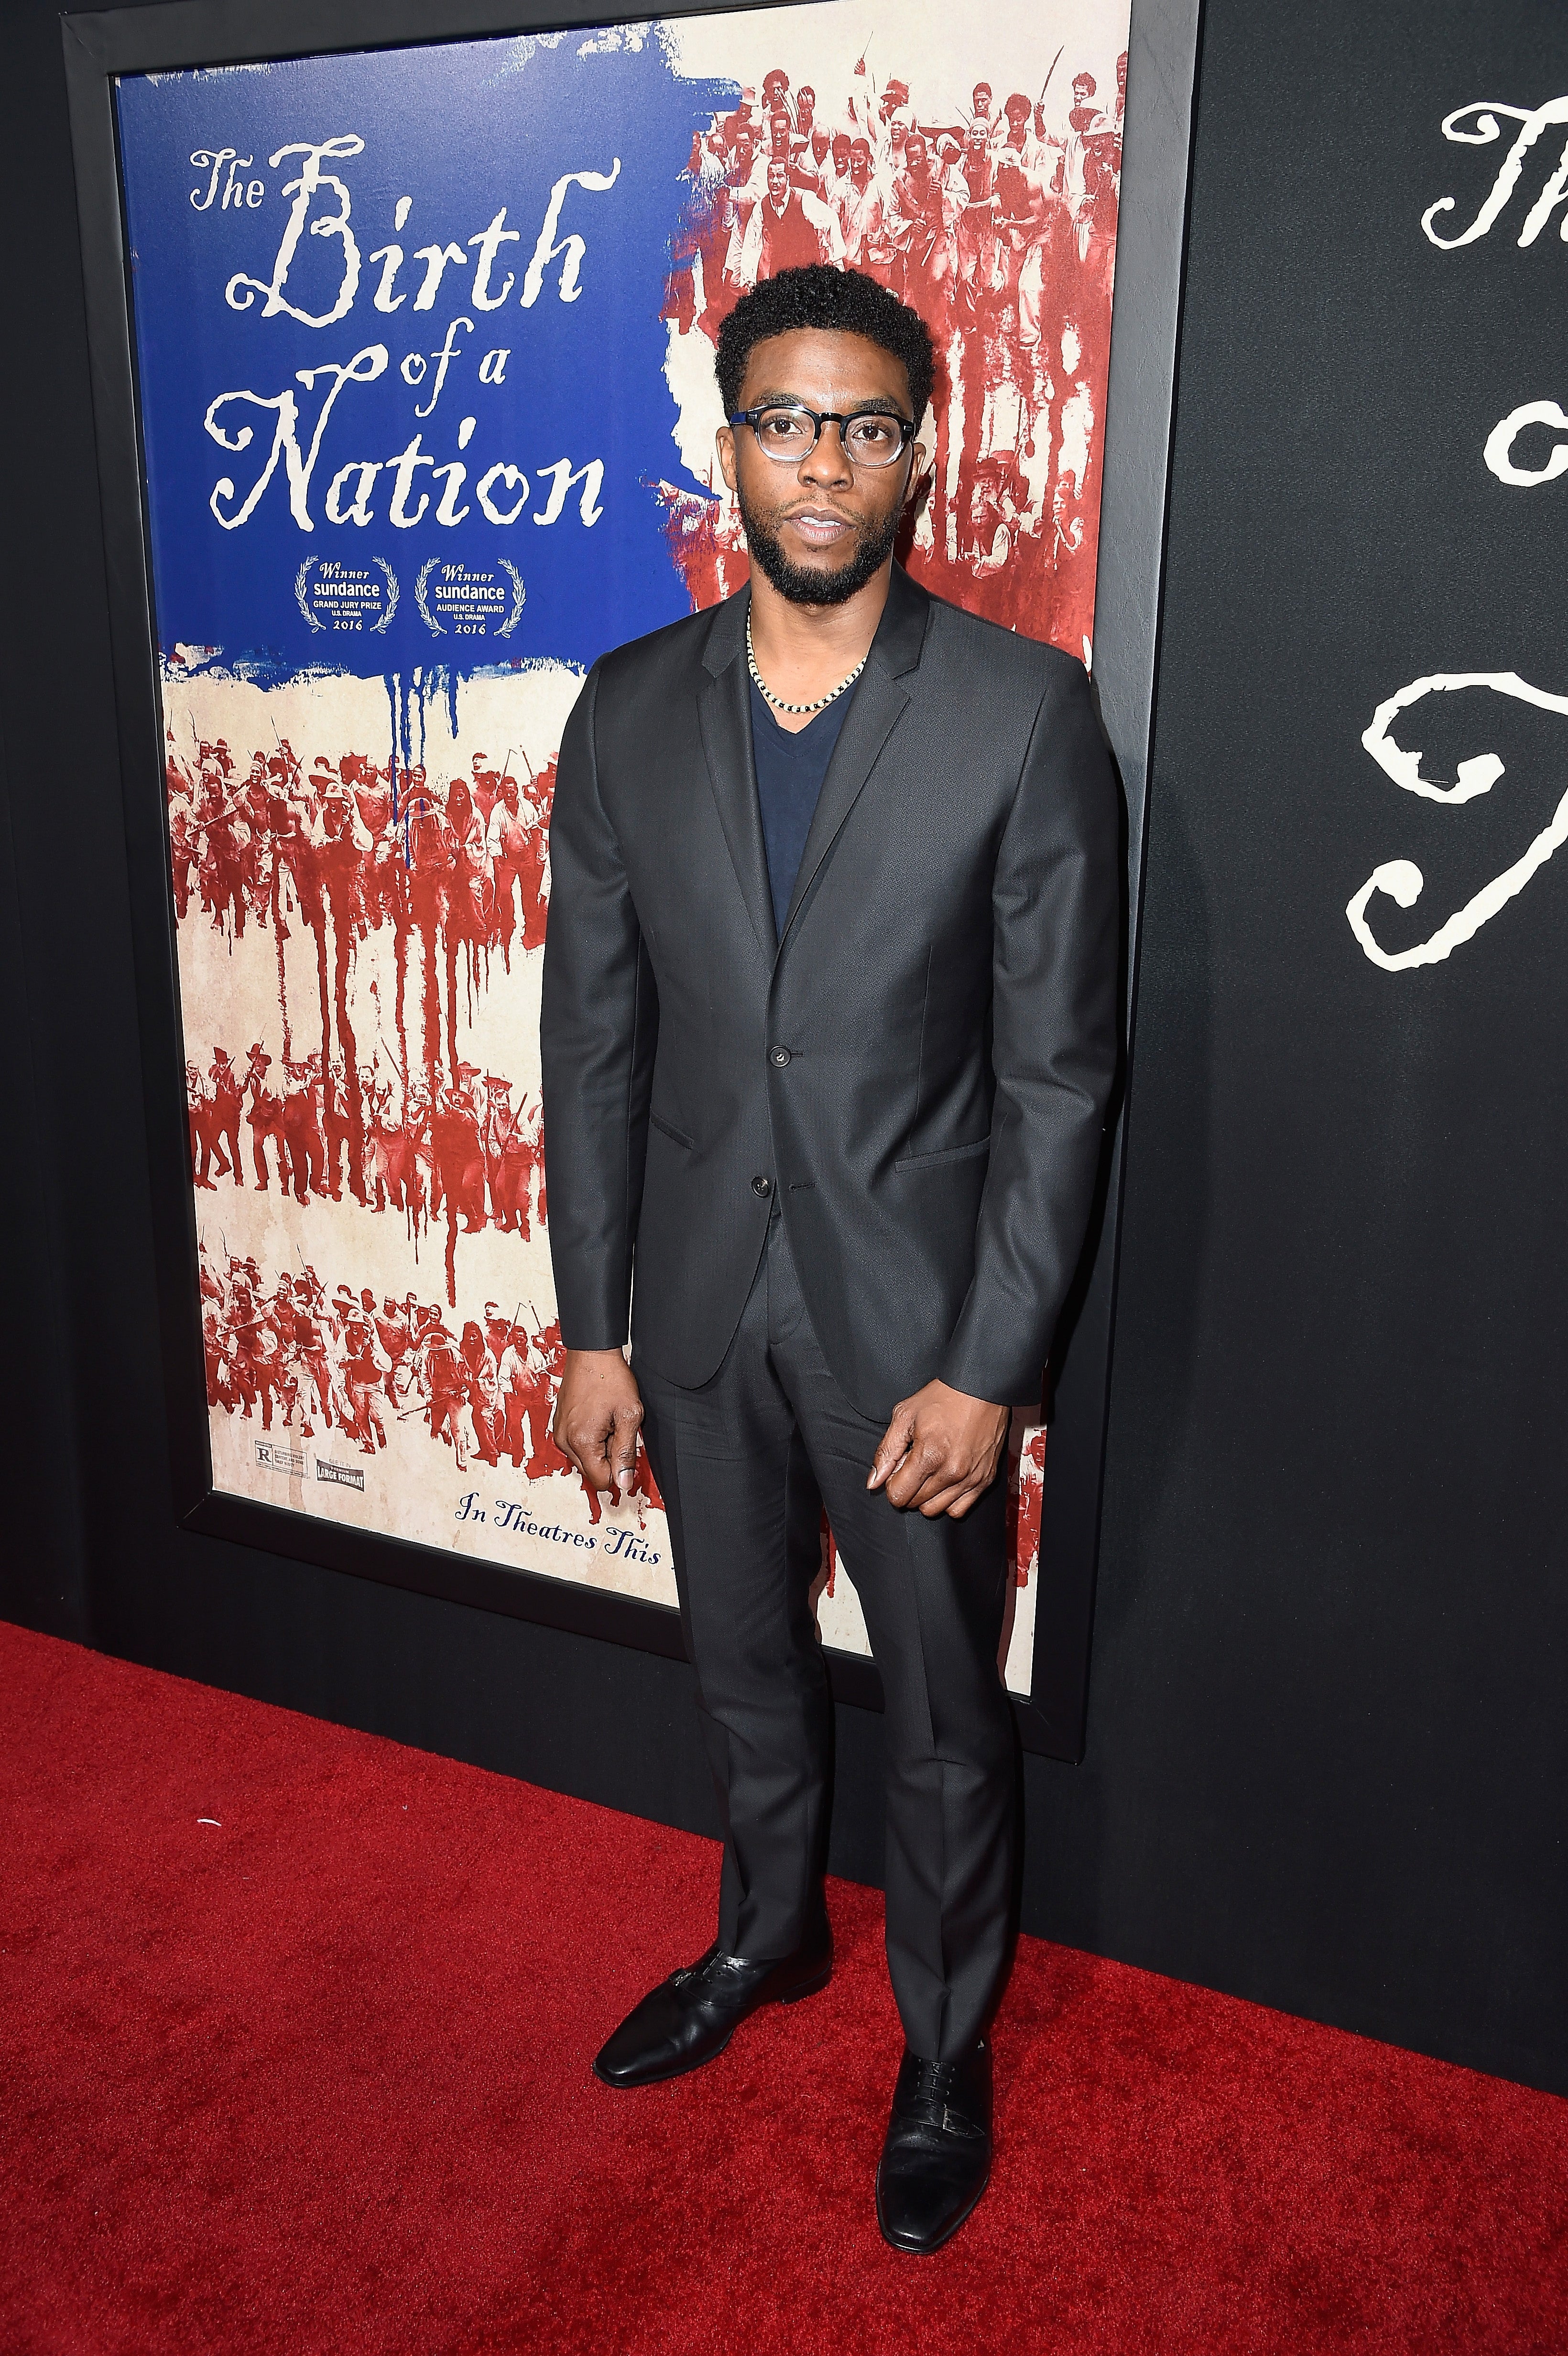 Celebs Come Out to Support "The Birth of a Nation" Premiere
